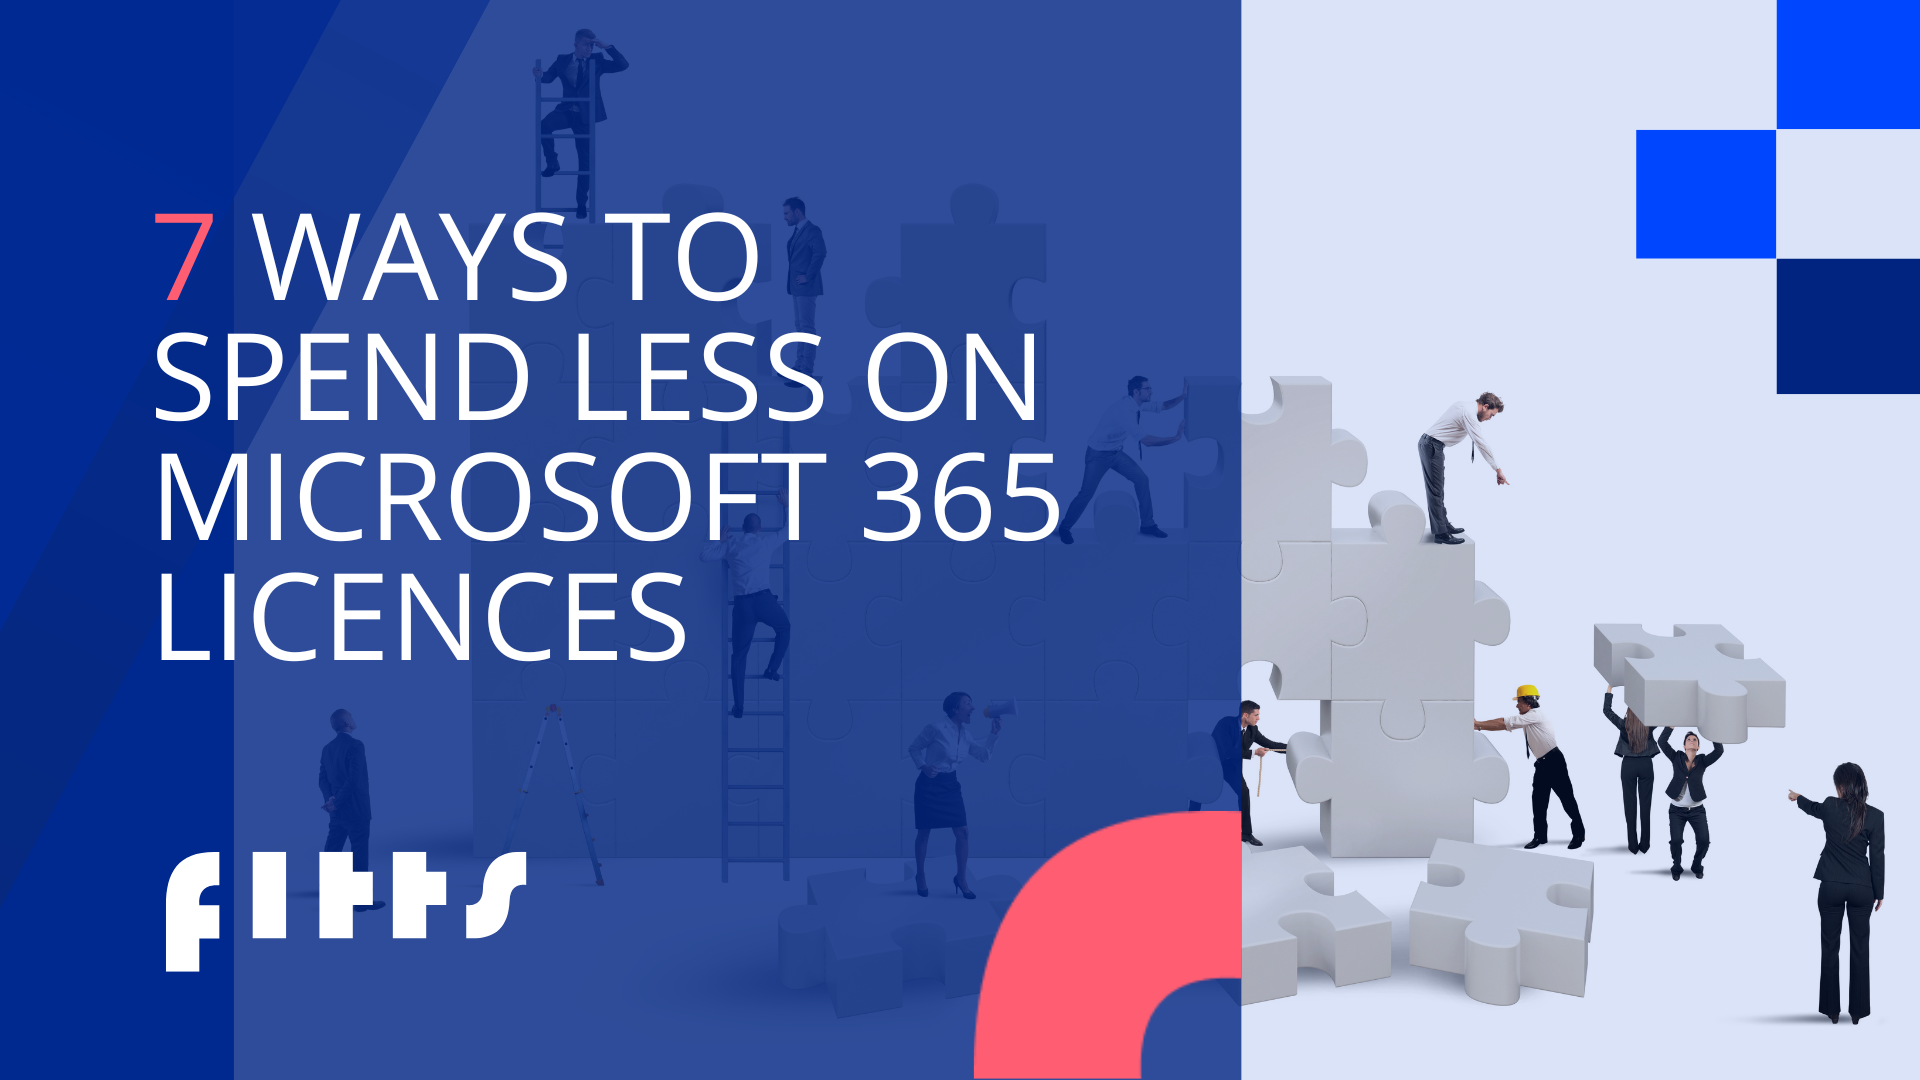 7 Ways To Spend Less On Microsoft 365 Licences Fitts 1256